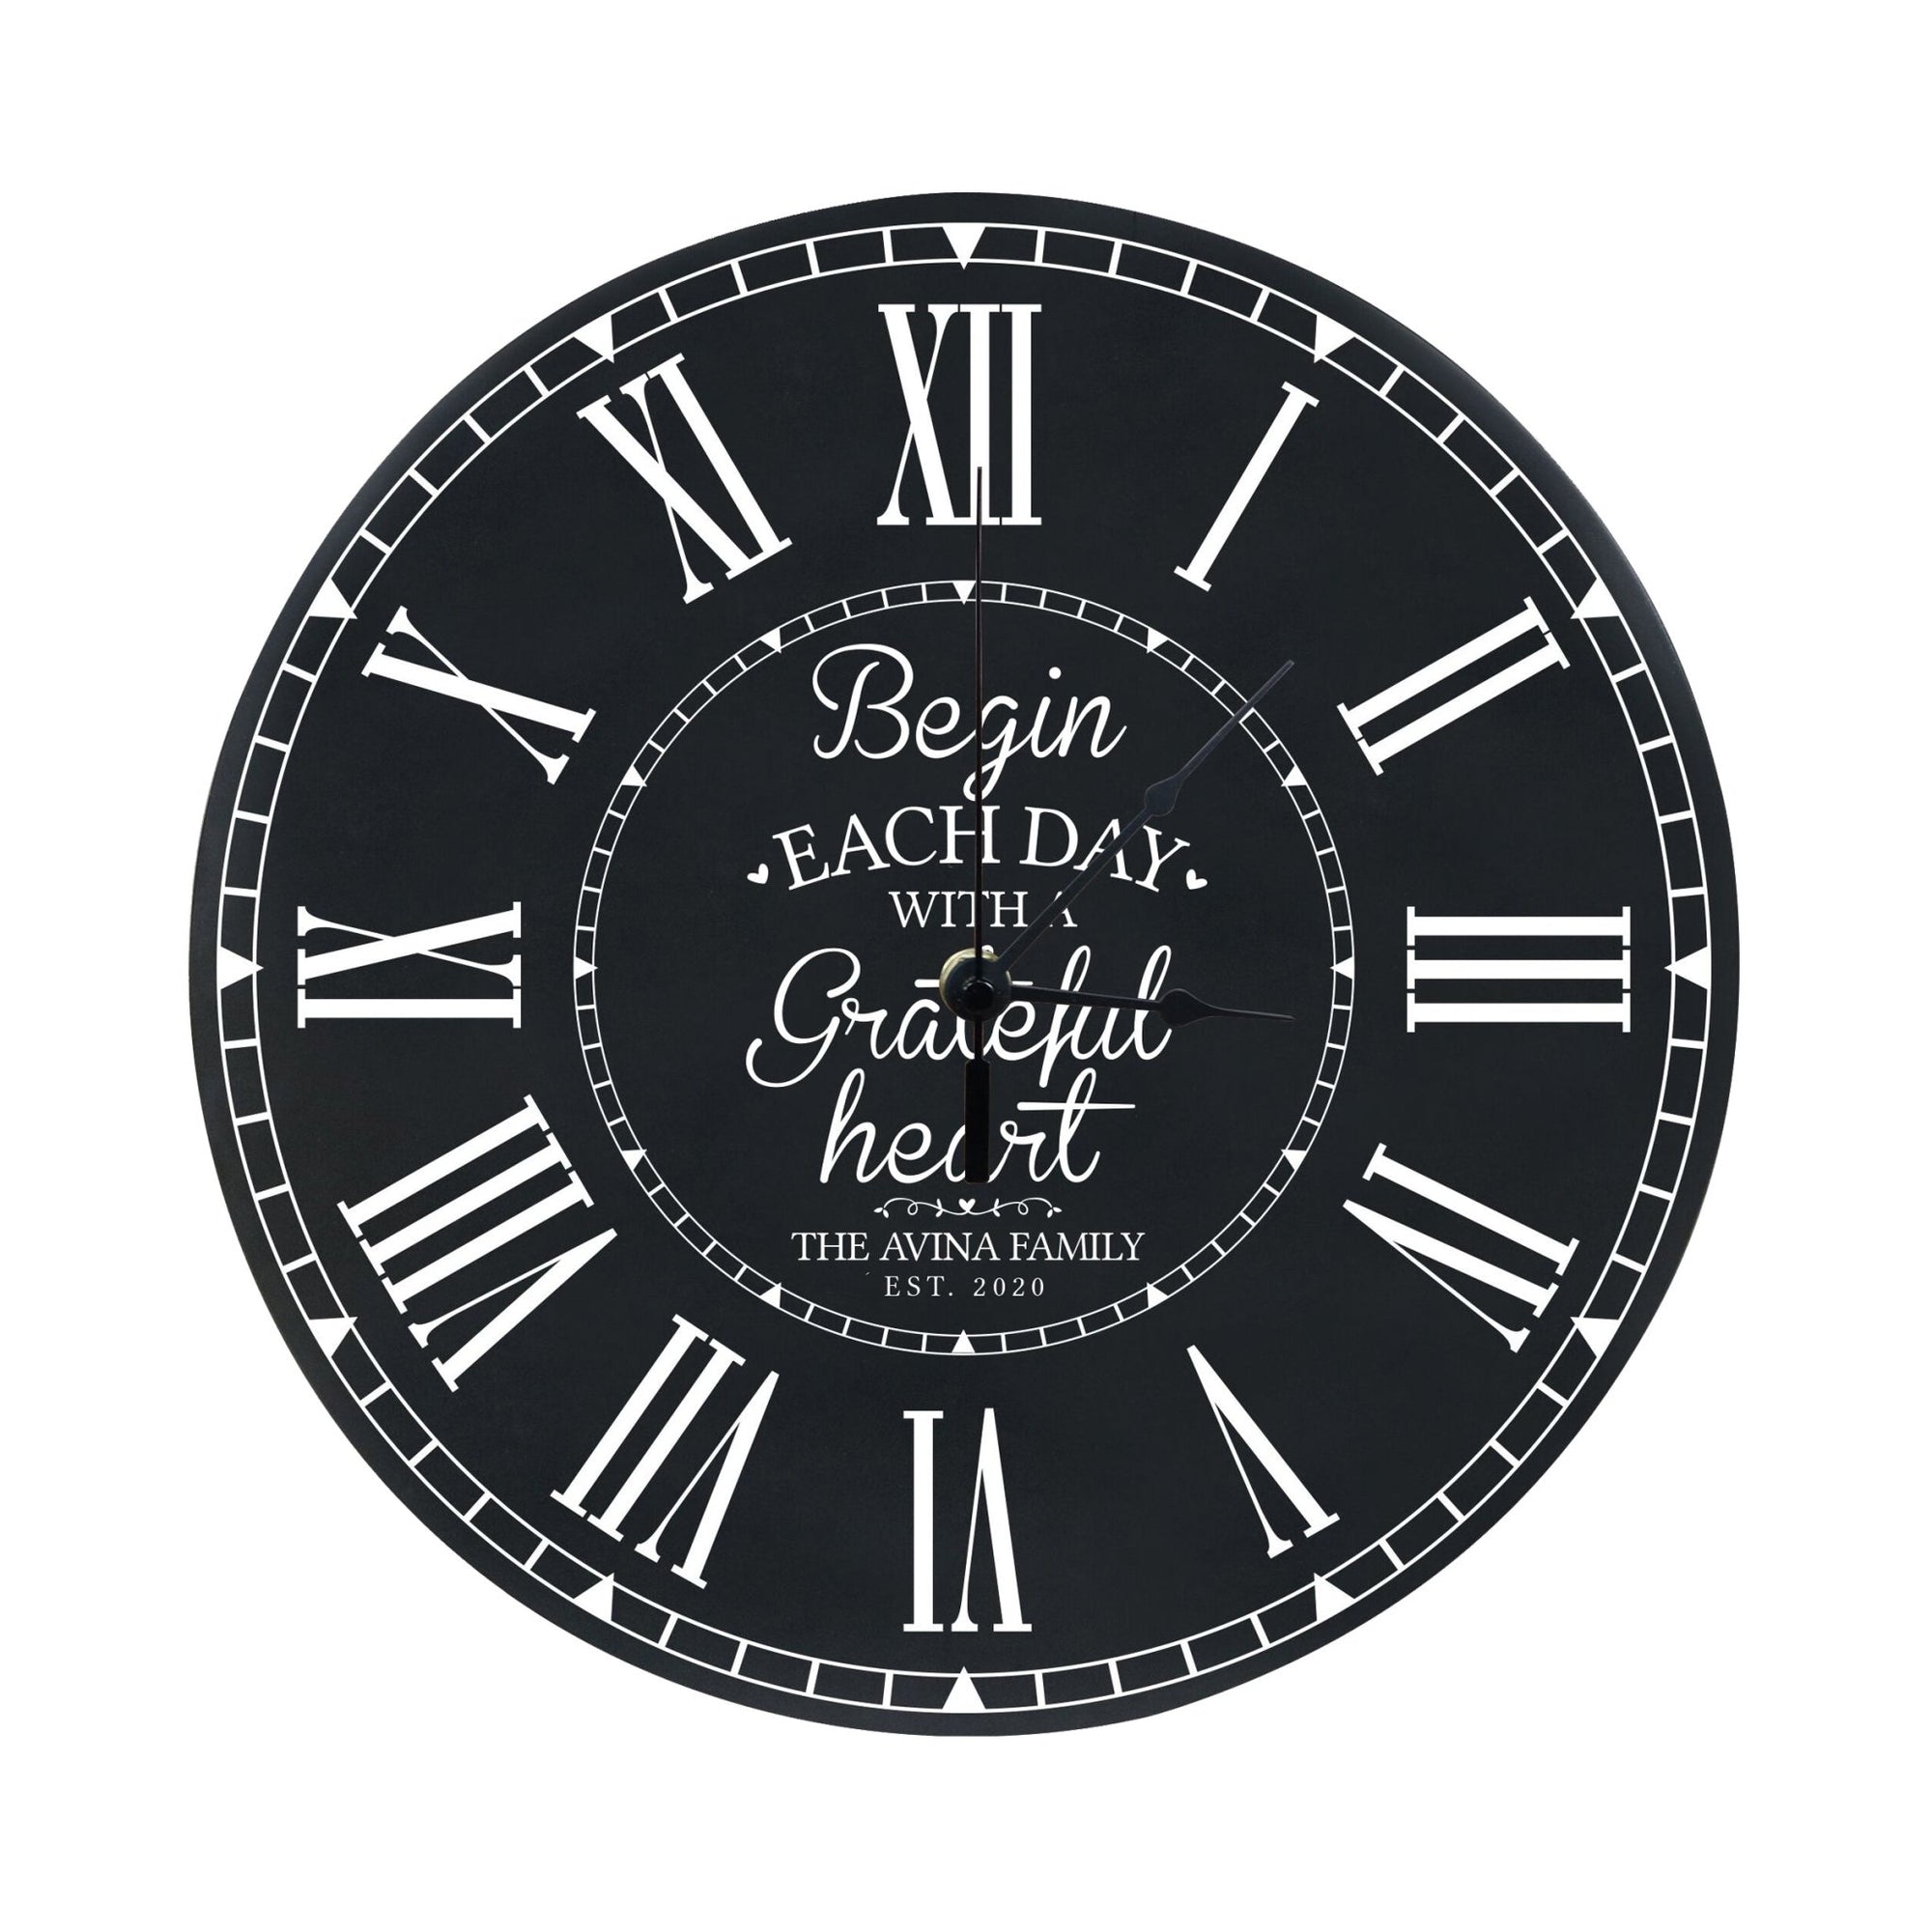 Personalized Inspirational Everyday Home and Family Wall Clock 12 x 12 x 0.75 - (Begin each day) - LifeSong Milestones